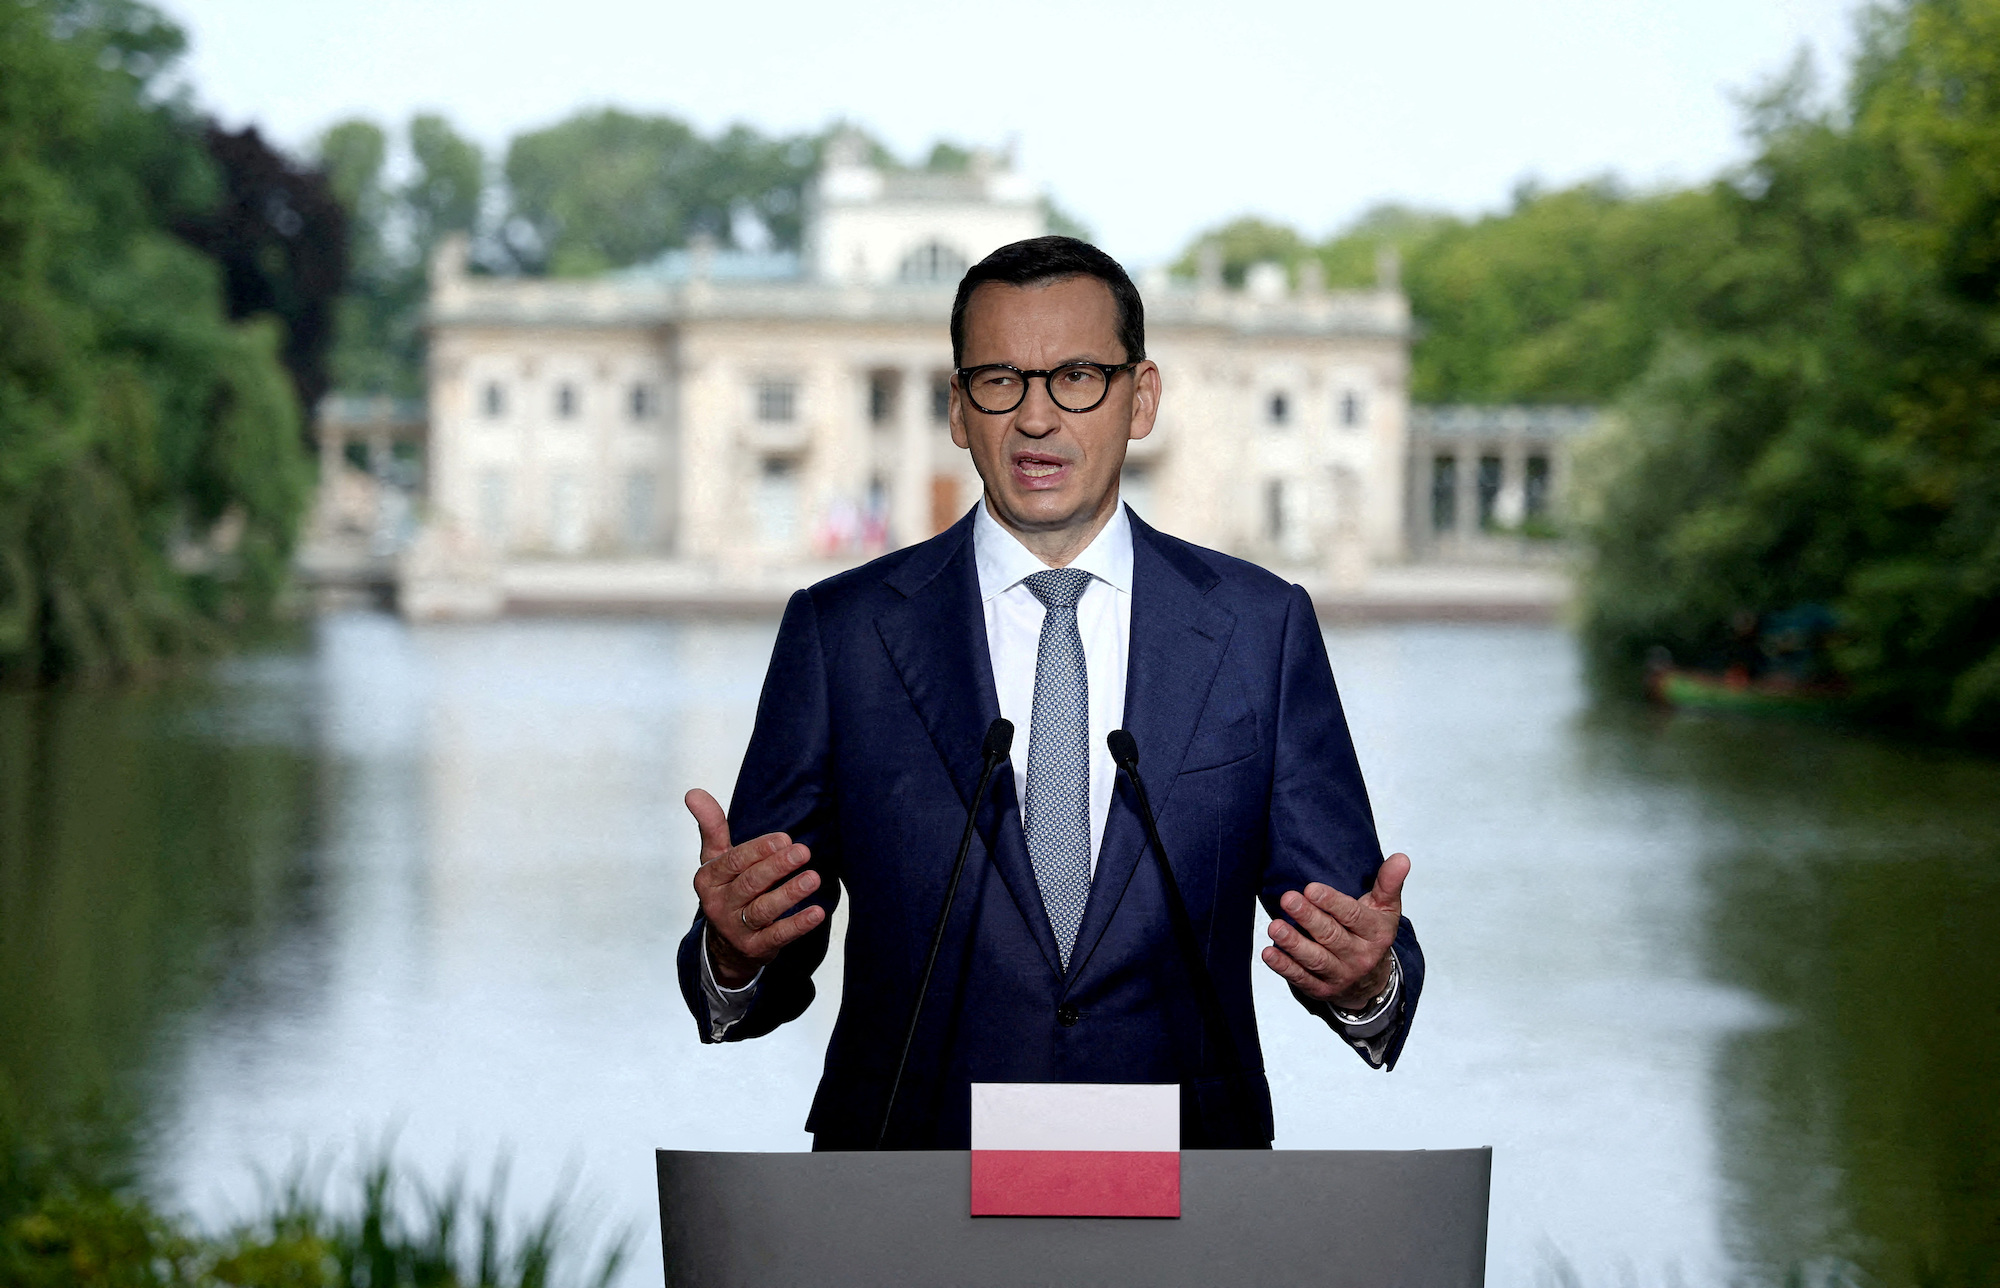 Polish Prime Minister Mateusz Morawiecki attends a press conference in Warsaw on July 5.